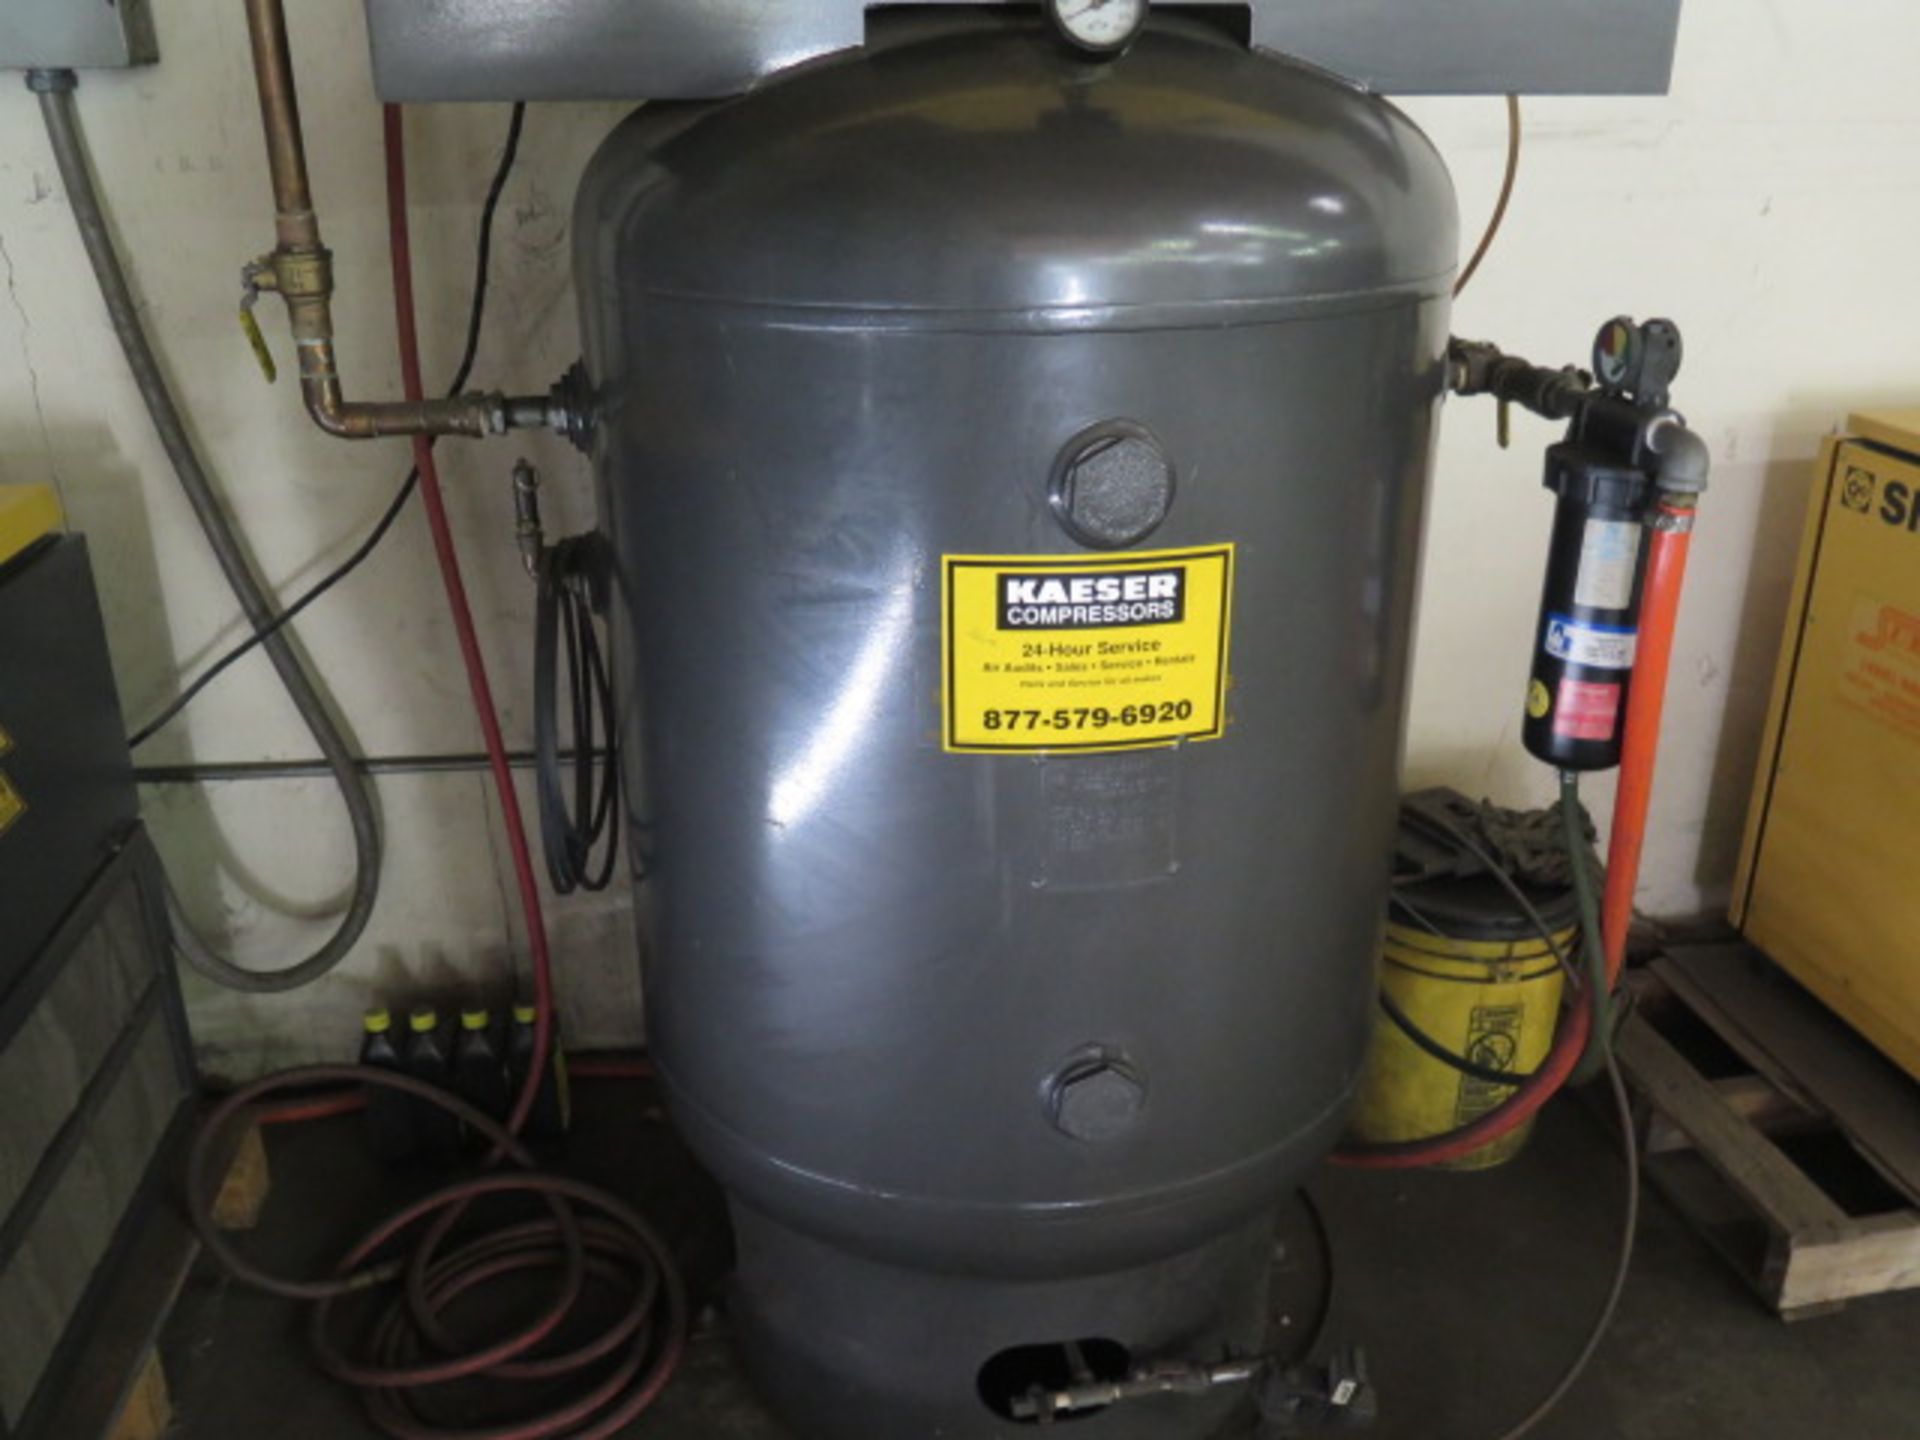 2006 Kaeser SM11 10Hp Rotary Air Compressor s/n 1220 w/ Dig Controls, 42 CFM @ 110 PSIG31,SOLD AS IS - Image 14 of 15